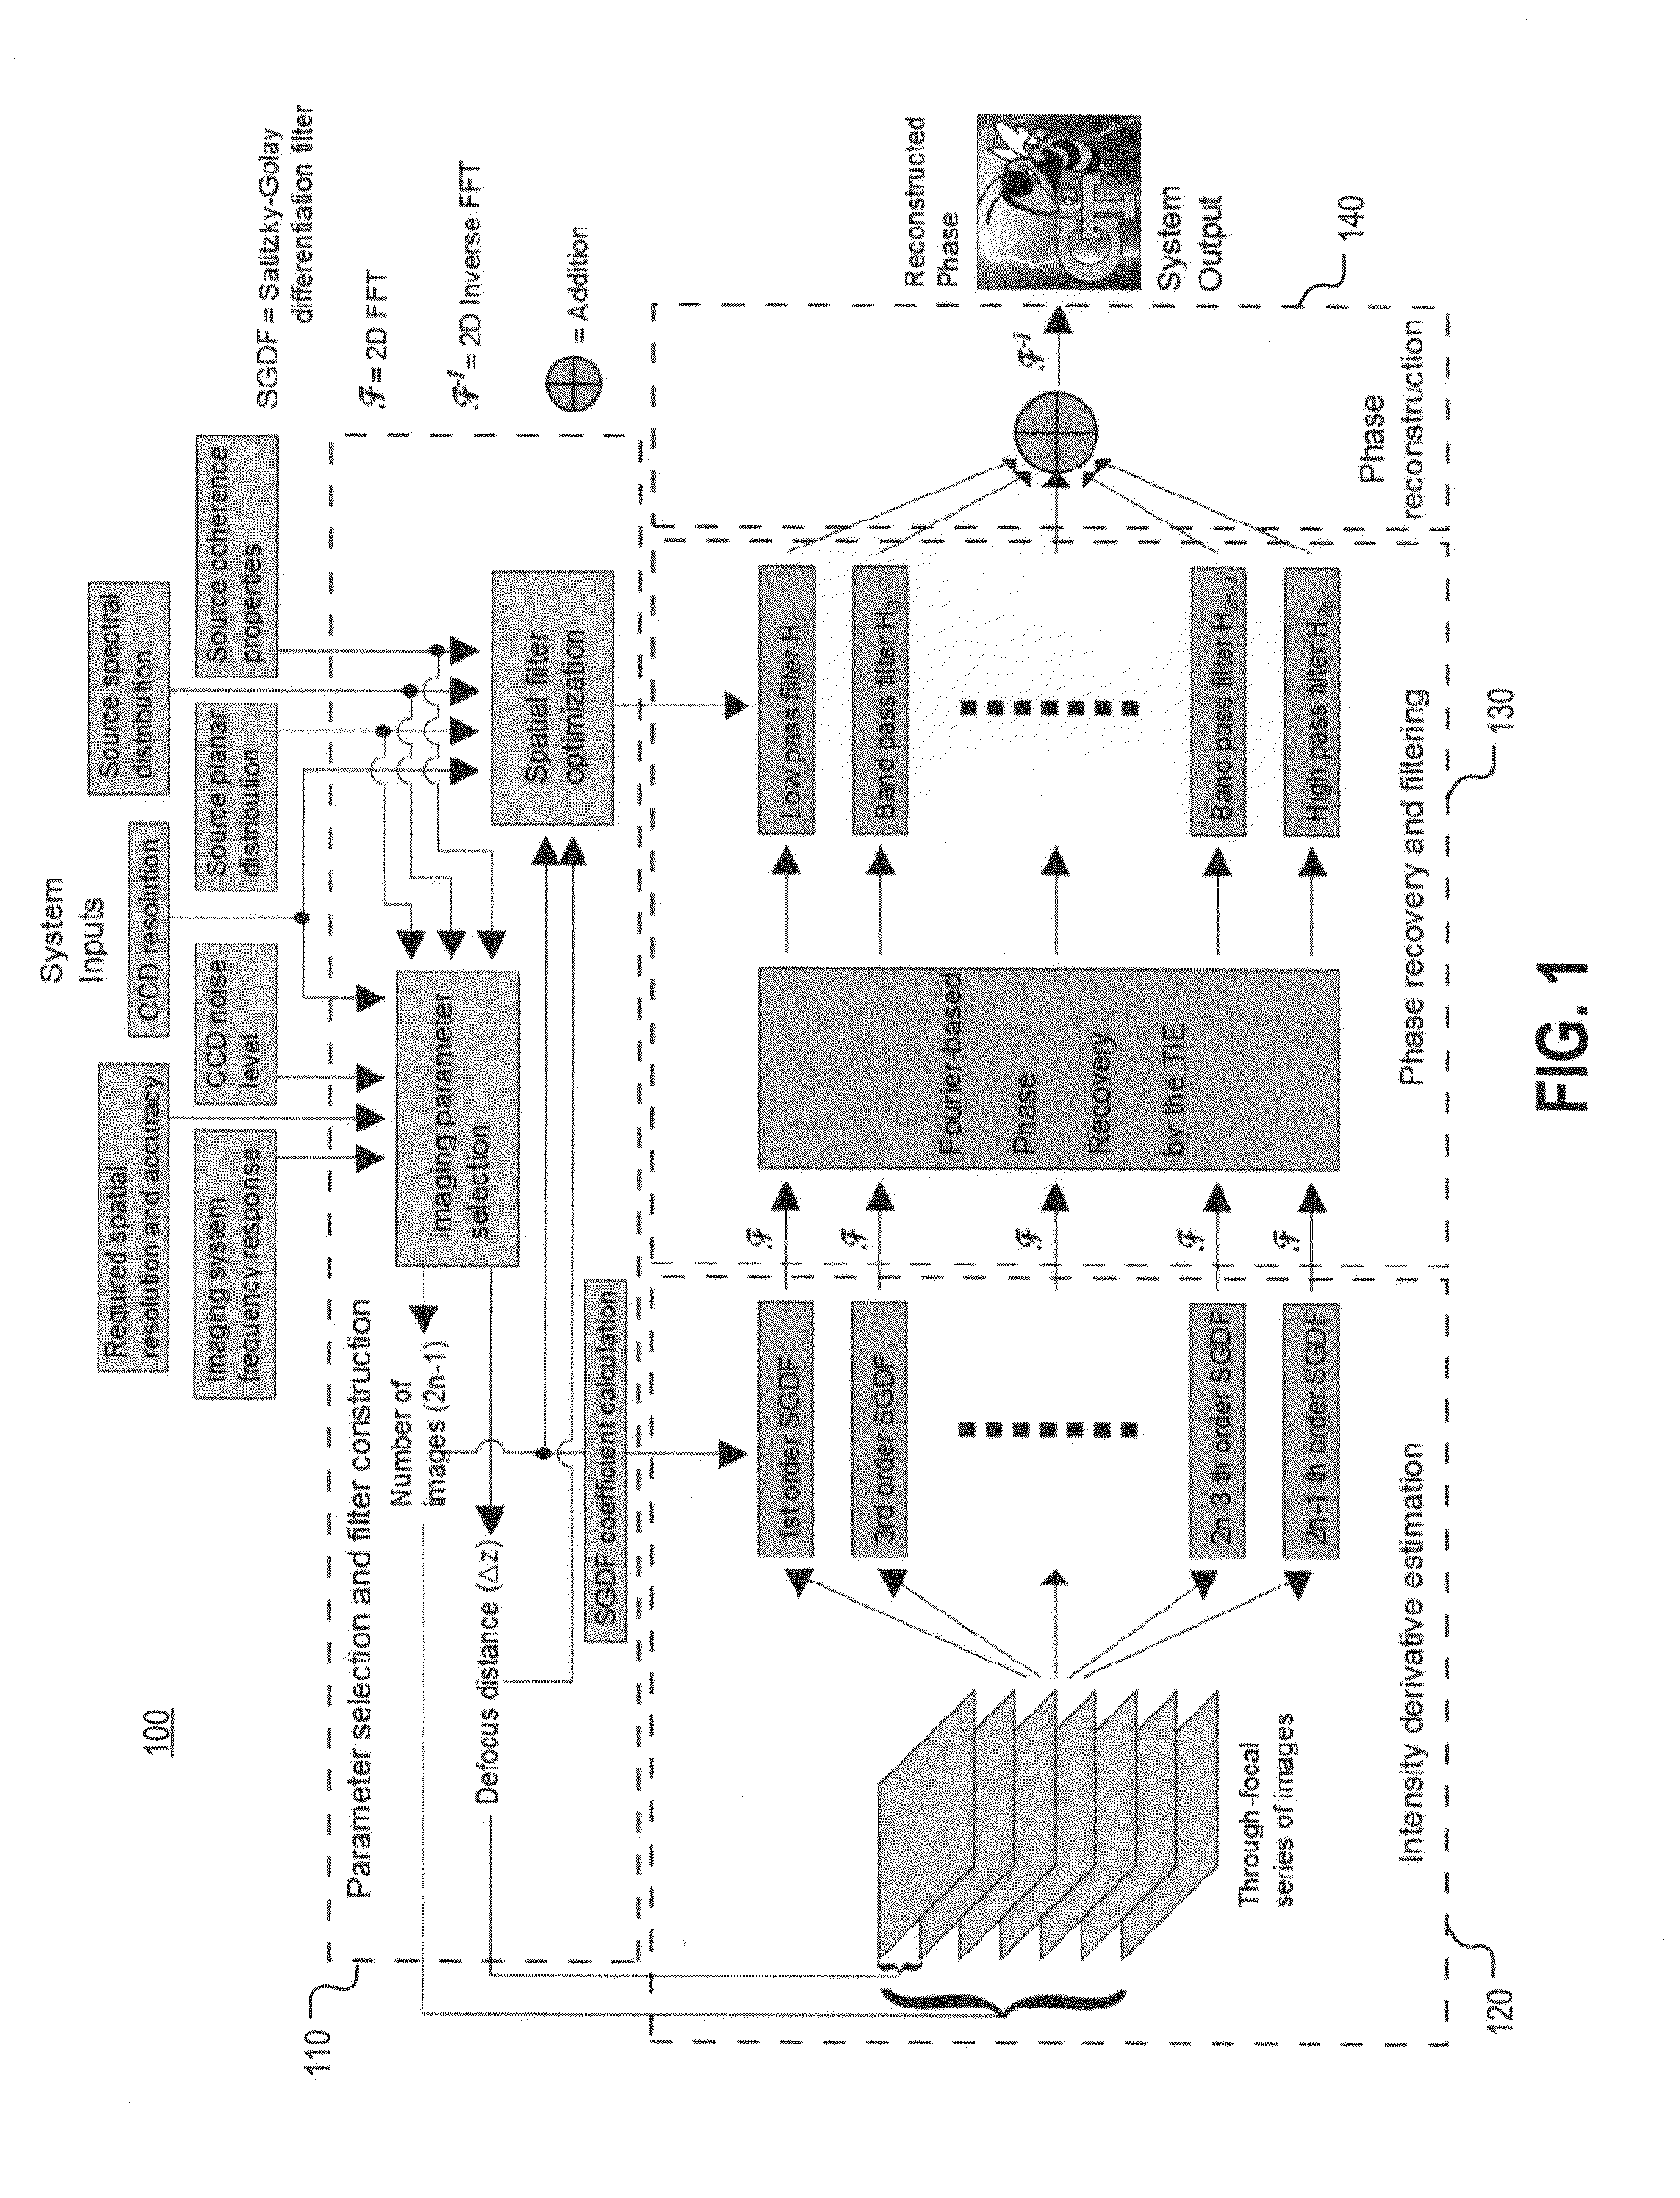 Systems and methods for quantitative phase imaging with partially coherent illumination